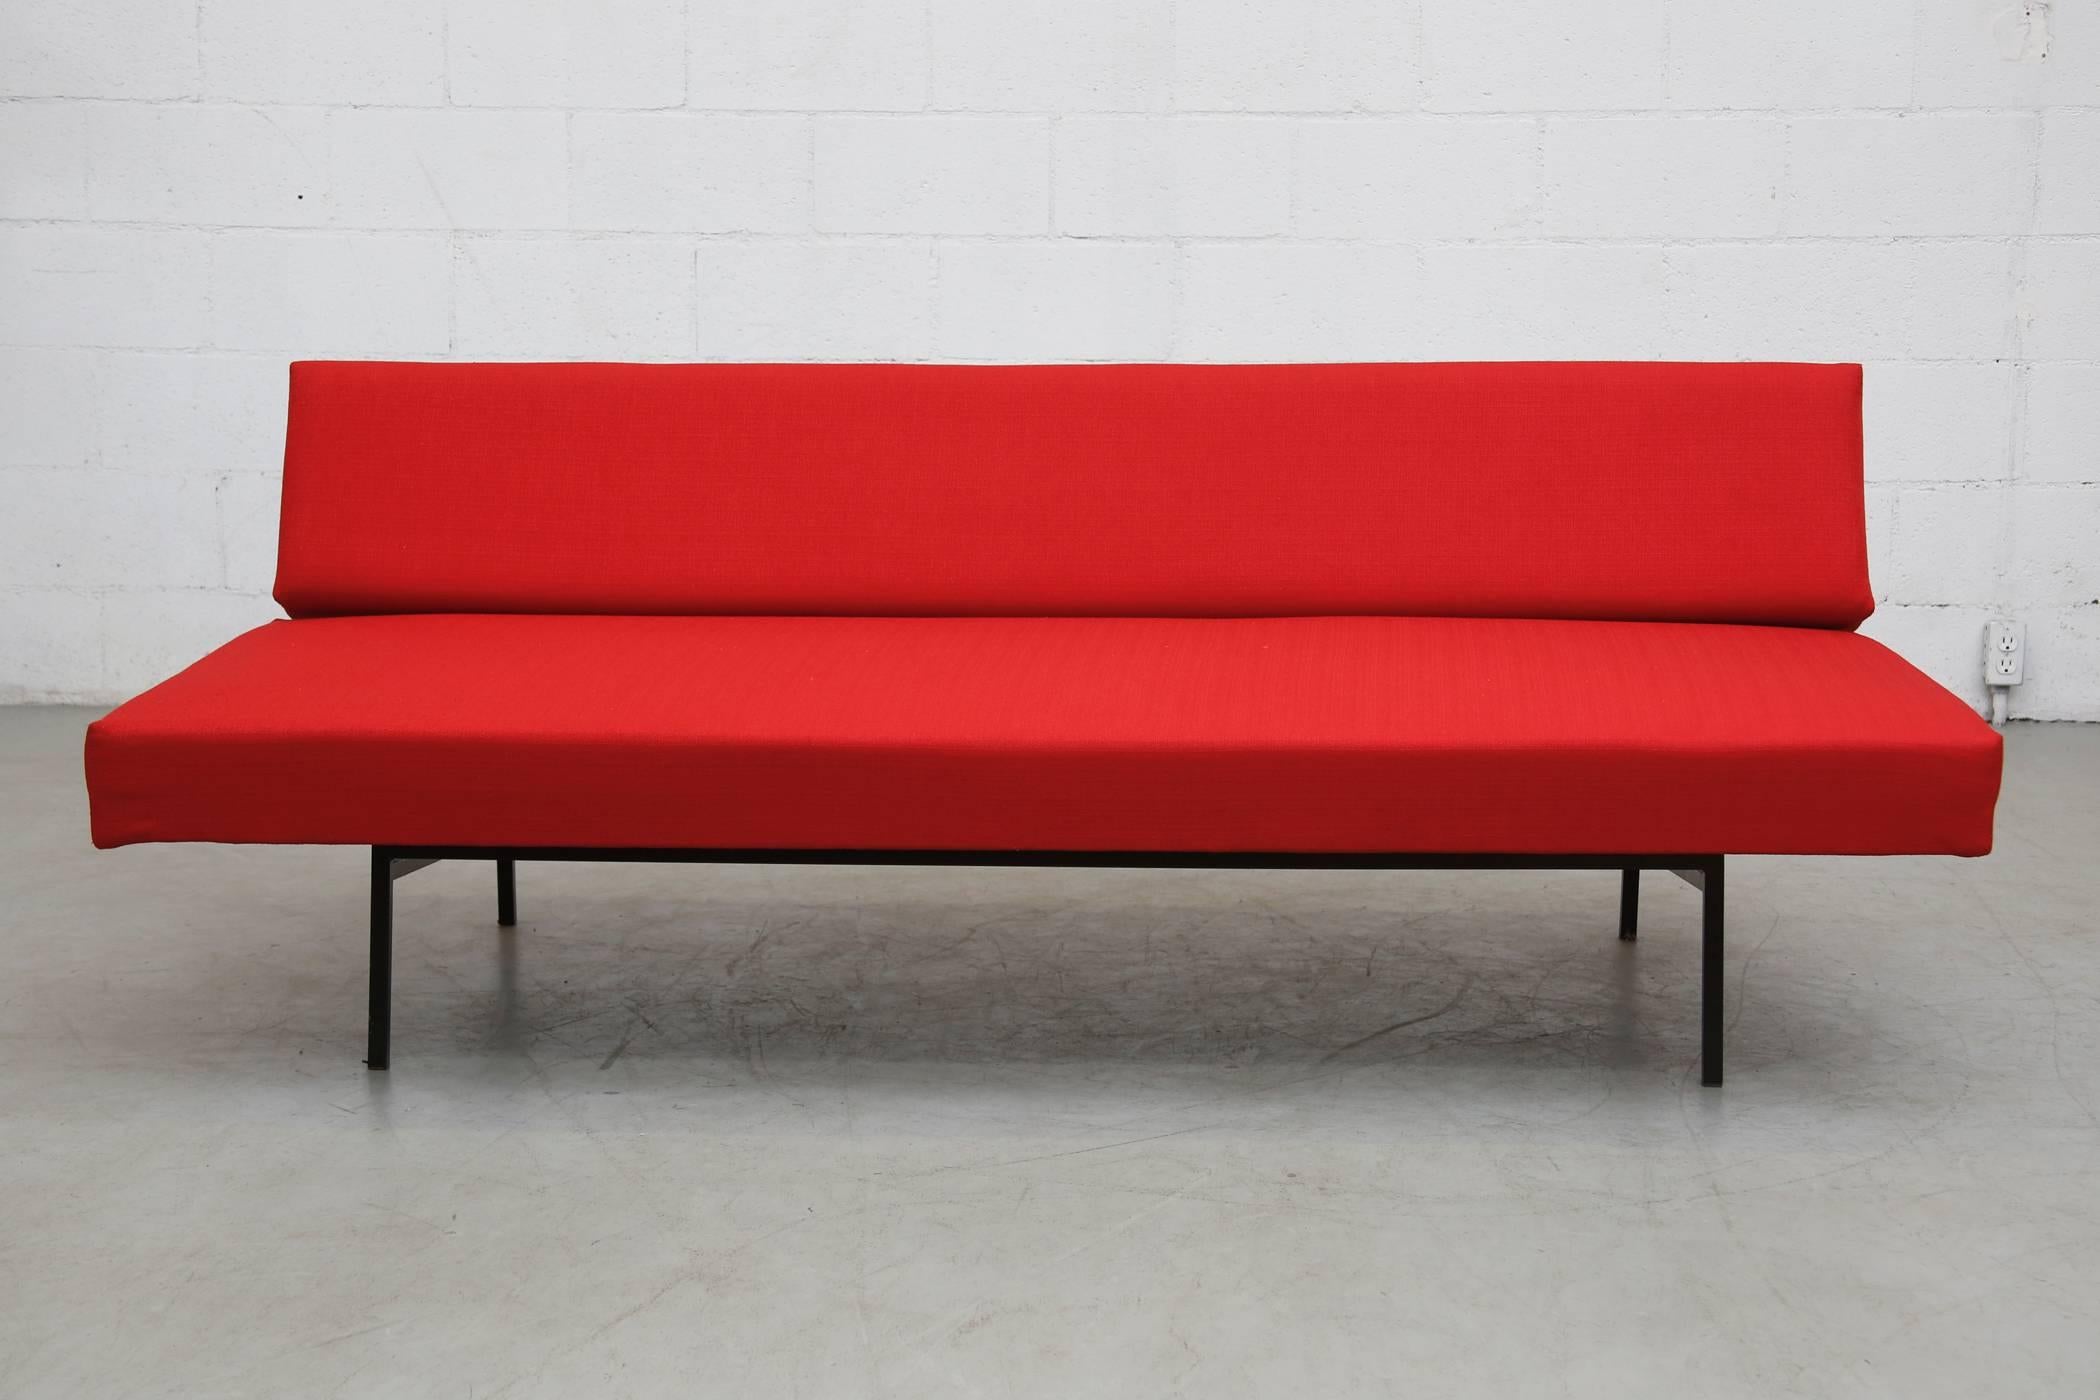 Beautiful Gijs Van Der Sluis designed, mid-century sleeper sofa with enameled black metal frame. Recently upholstery in fire red. The bottom pulls away from seat back to level out and become a daybed! Frame in original condition with some wear